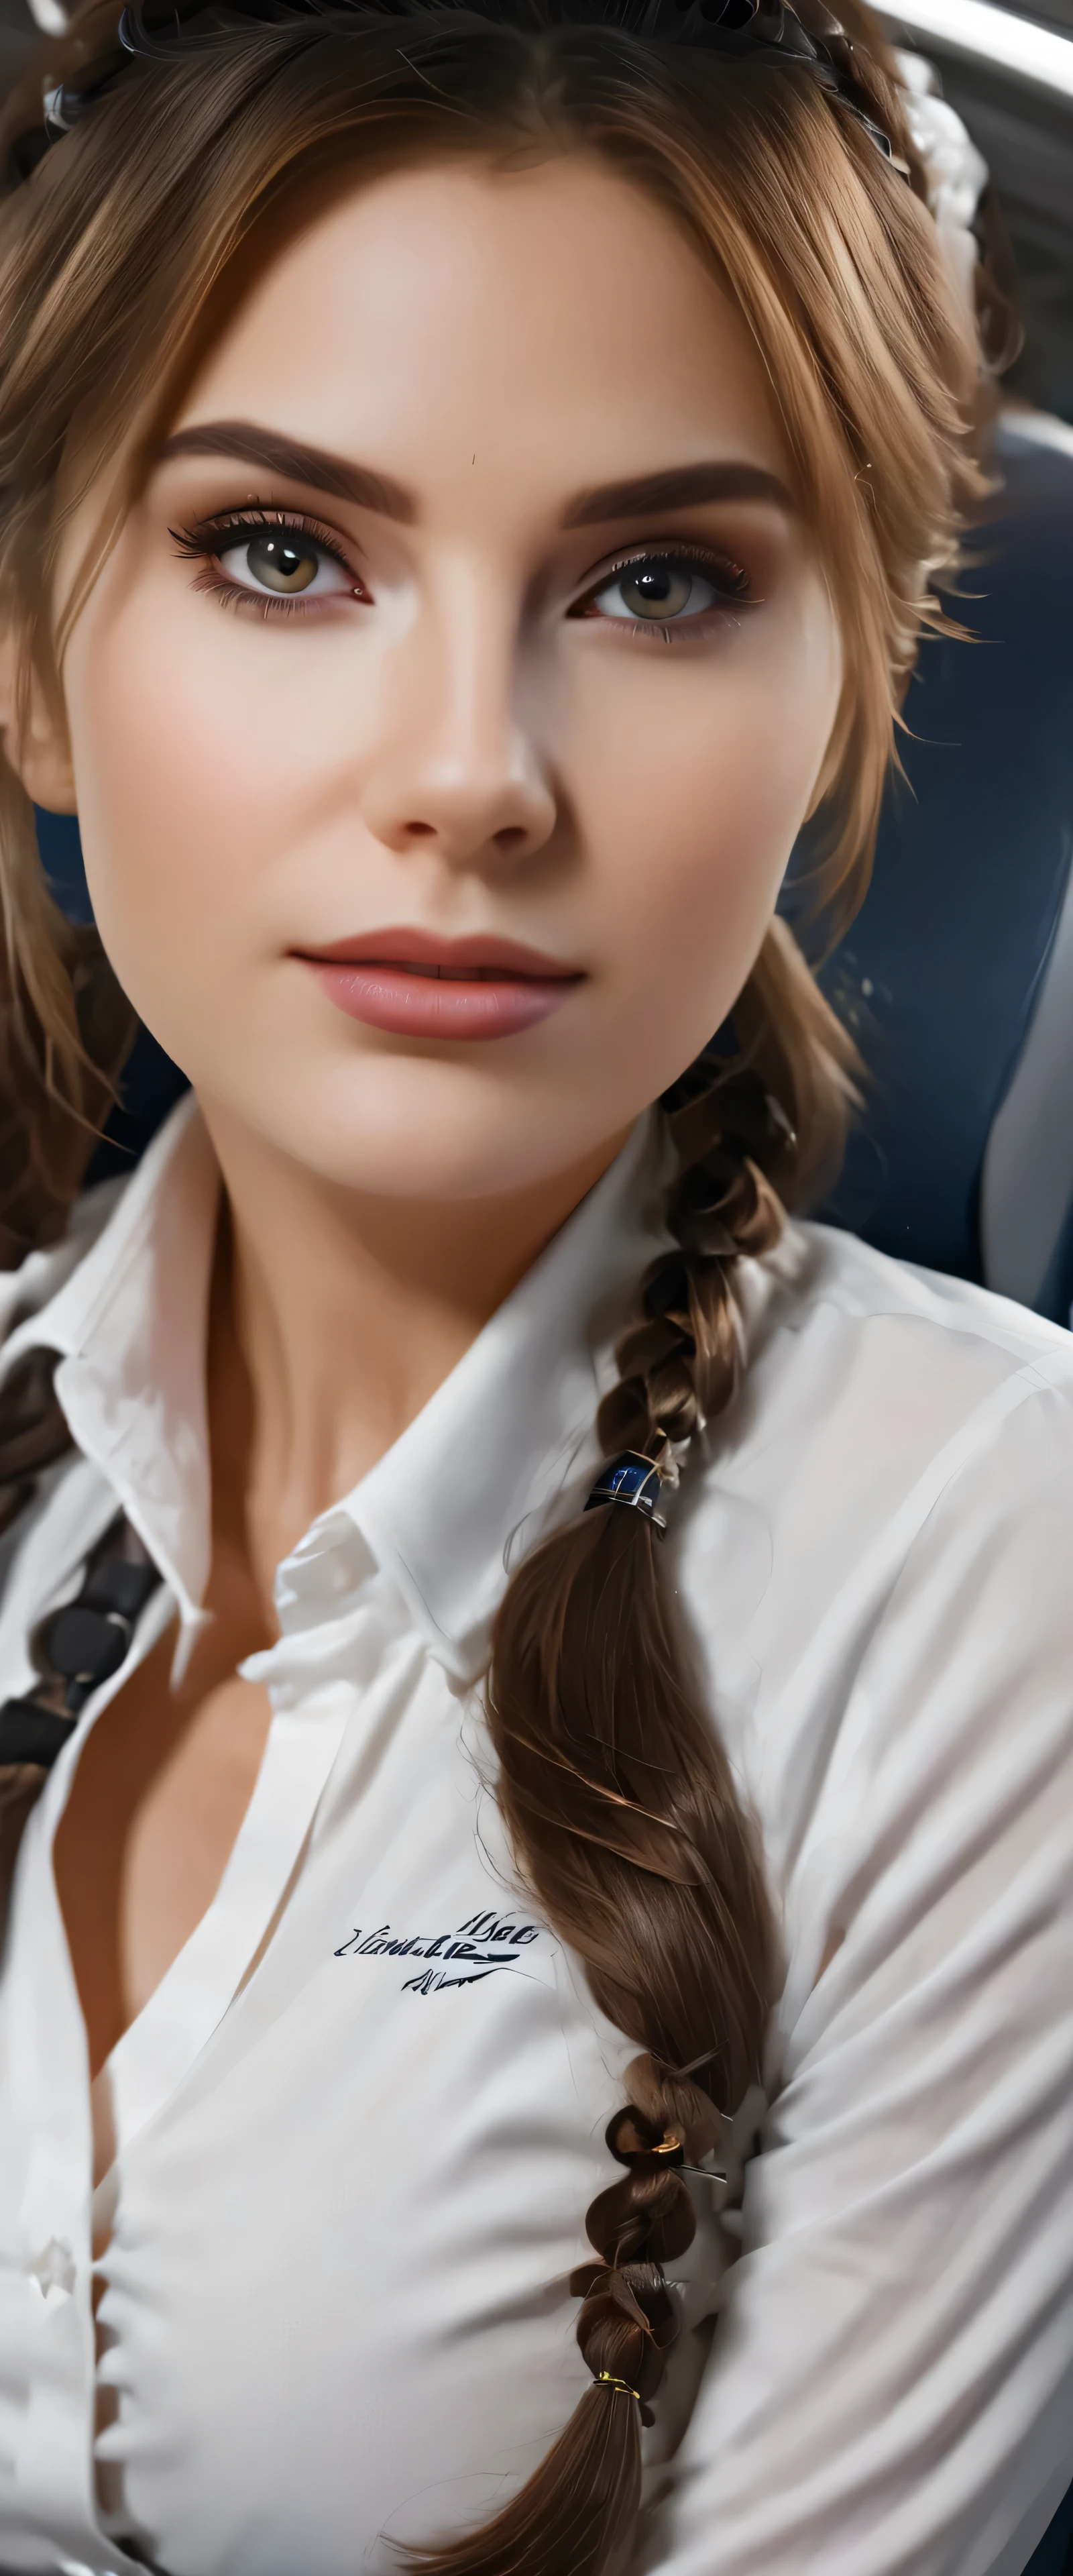 UHD,beautiful detailed eyes,beautiful detailed lips,extremely detailed face, long eyelashes,sophisticated hairstyle, professional uniform, airplane cabin, elegant posture,anatomically_perfectly_proportioned.body, confident expression, soft natural lighting, realistic rendering, vibrant colors.STOP.Safe_for_Work:2